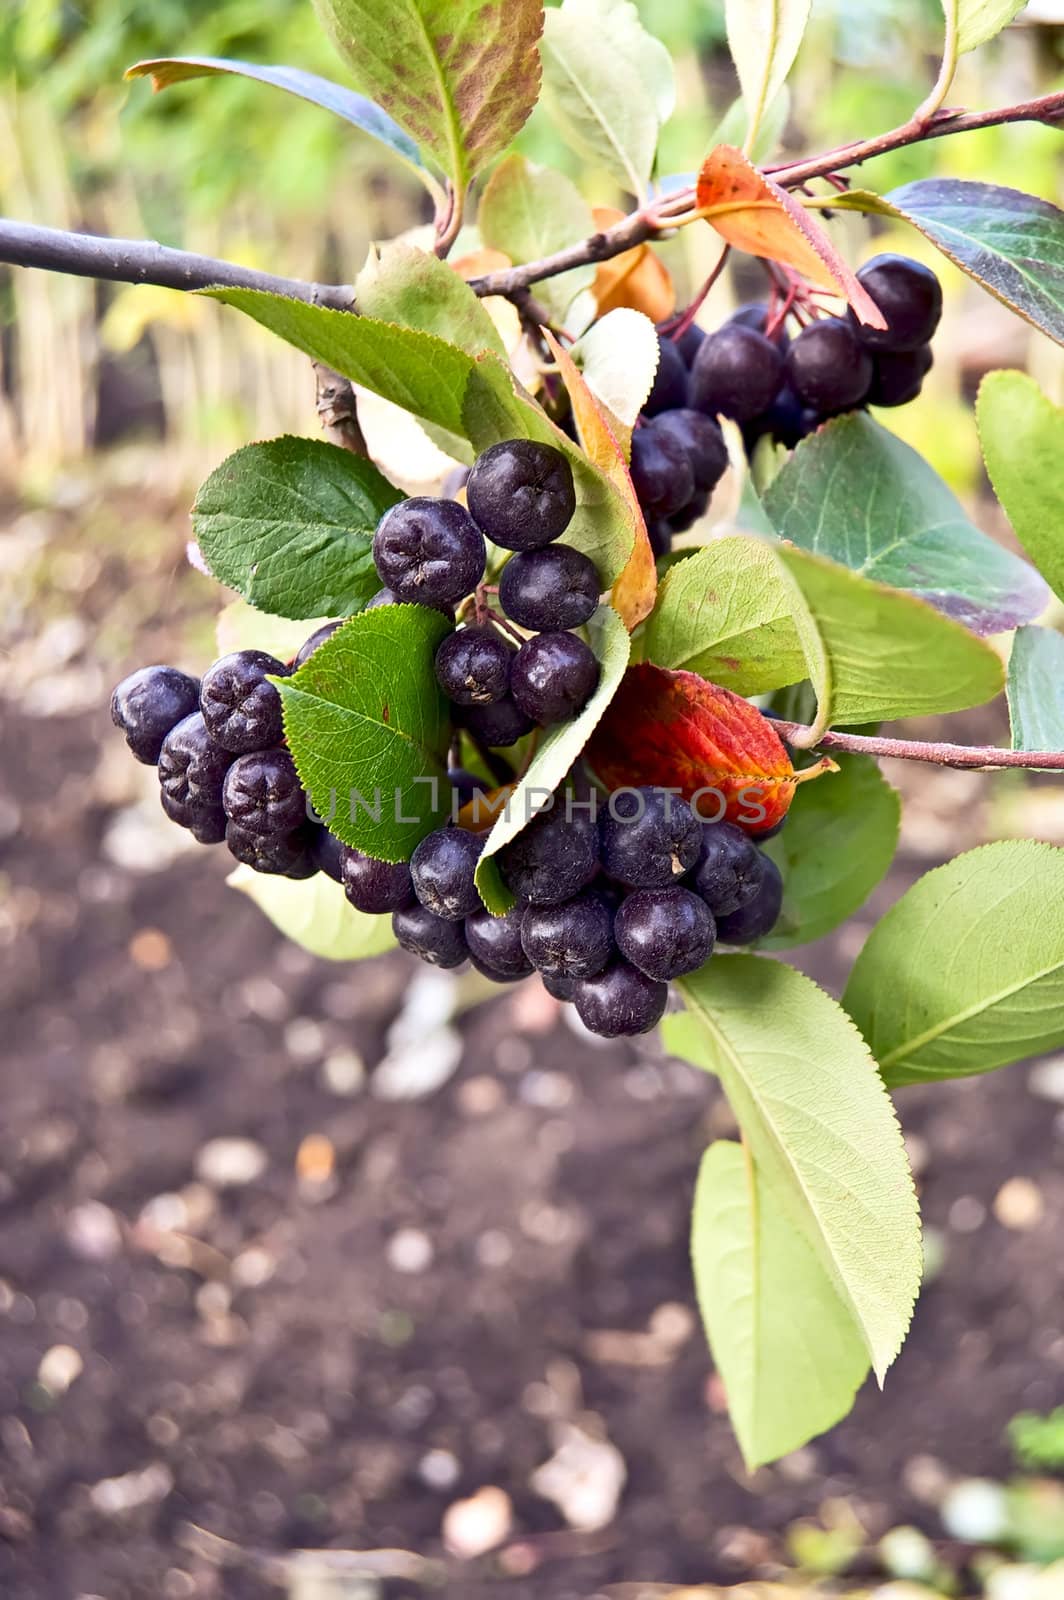 Branch with chokeberry on the background of green leaves and soil